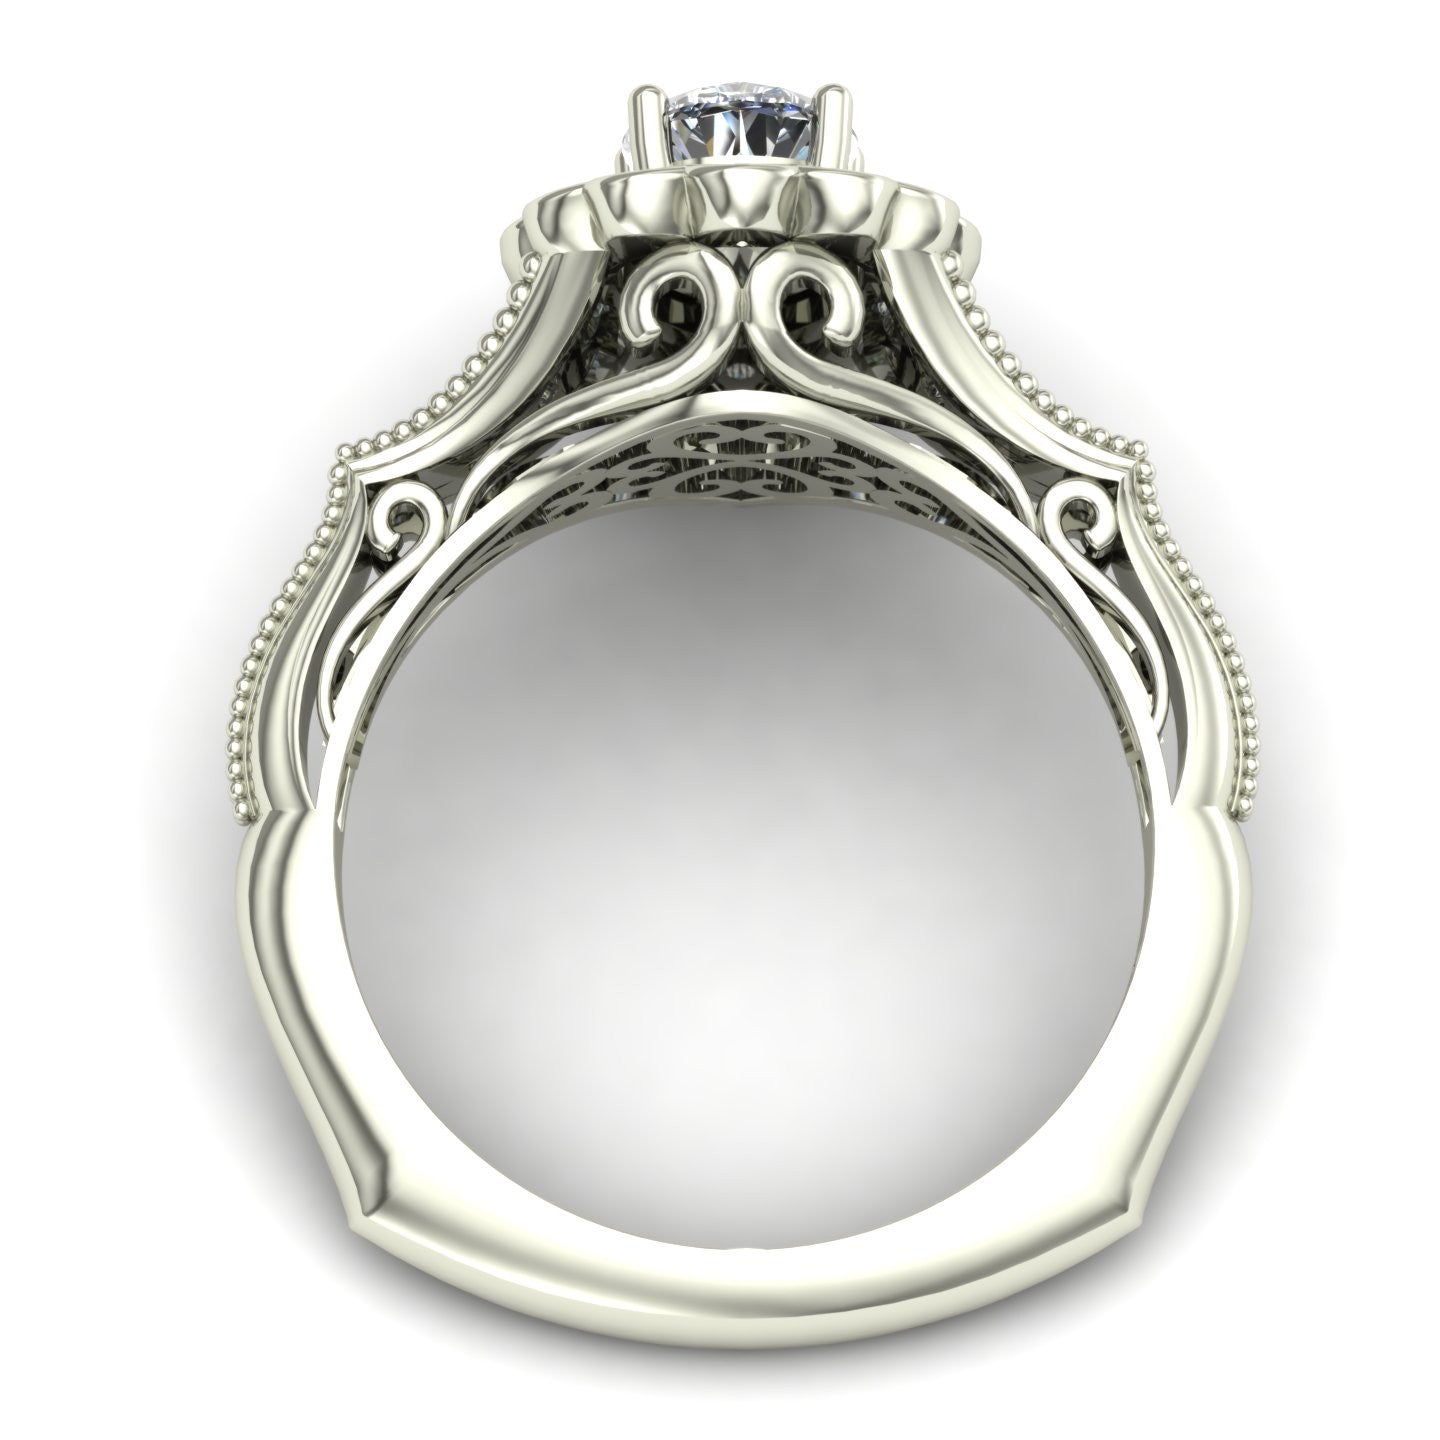 three quarter carat pear cut diamond engagement ring with scallop halo in 18k white gold - Charles Babb Designs - through finger view